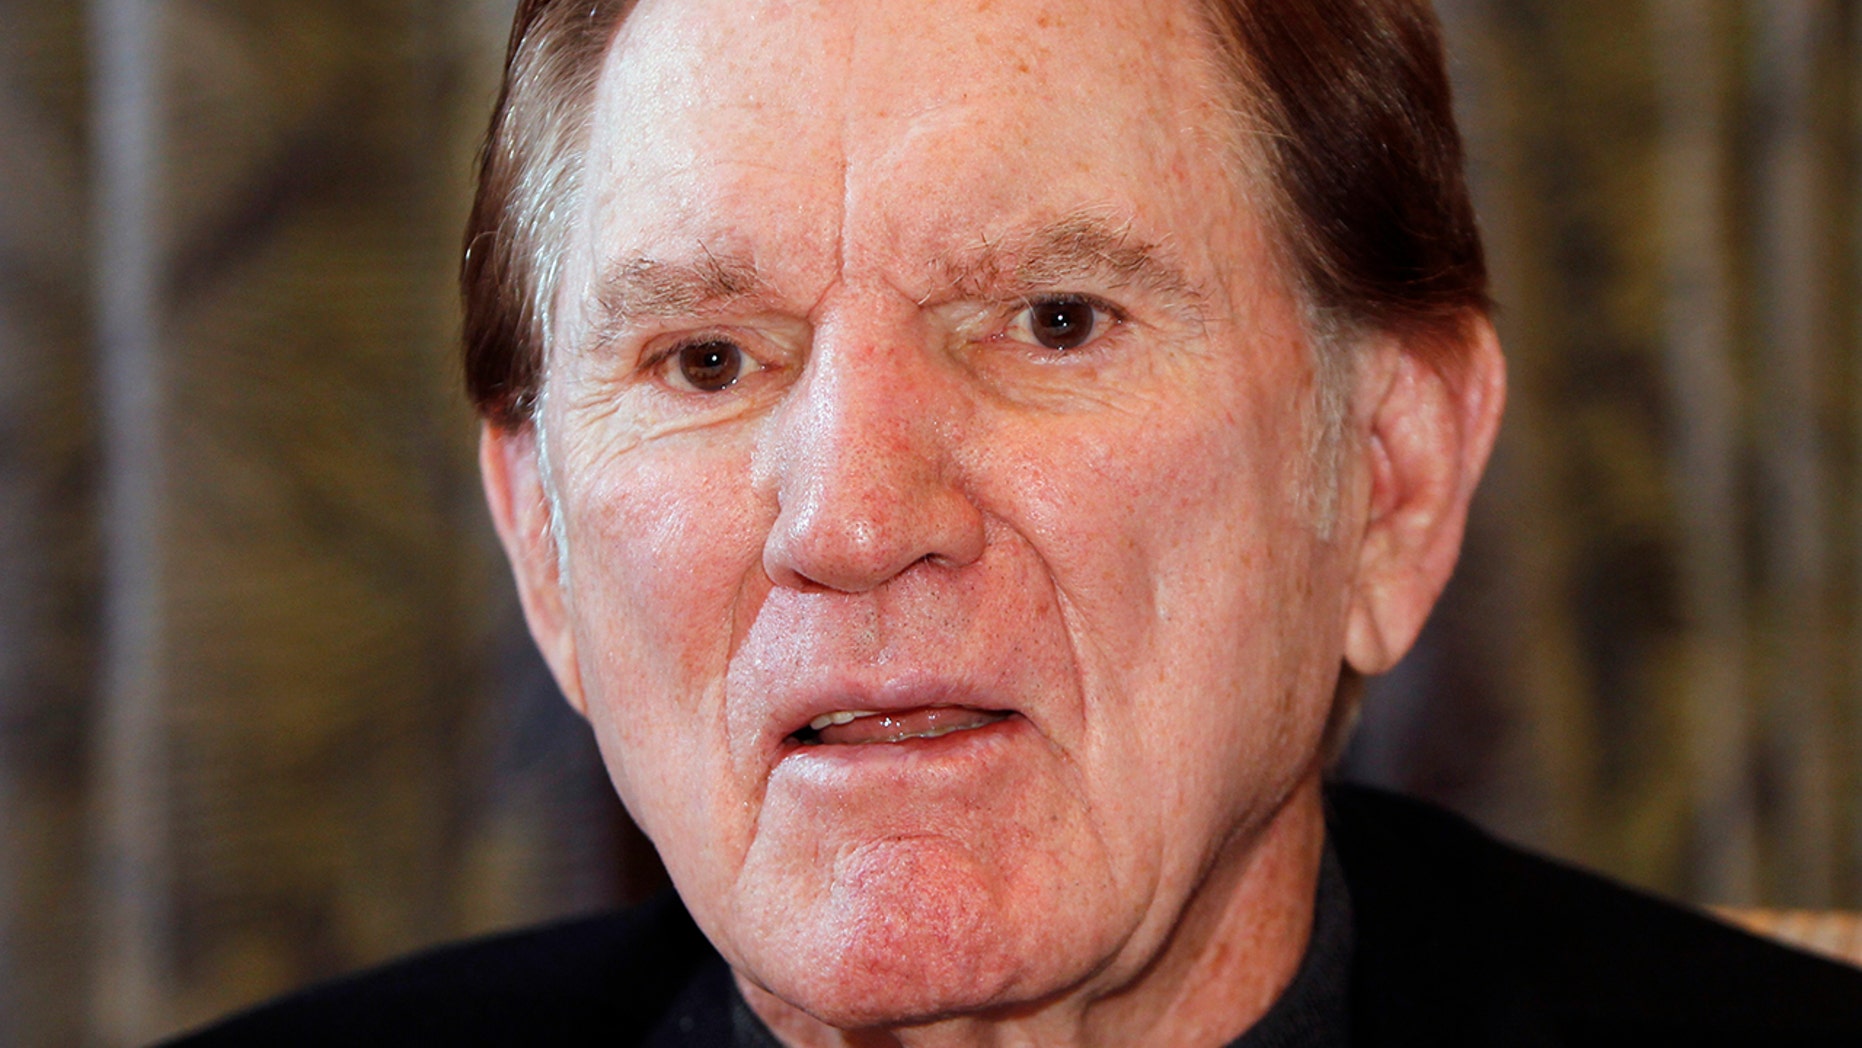 REPORT - In this November 14, 2011 photo, Hall of Fame football player Forrest Gregg talks about his fight against Parkinson's disease during an interview in Colorado Springs, Colorado (AP Photo / Ed Andrieski, File )